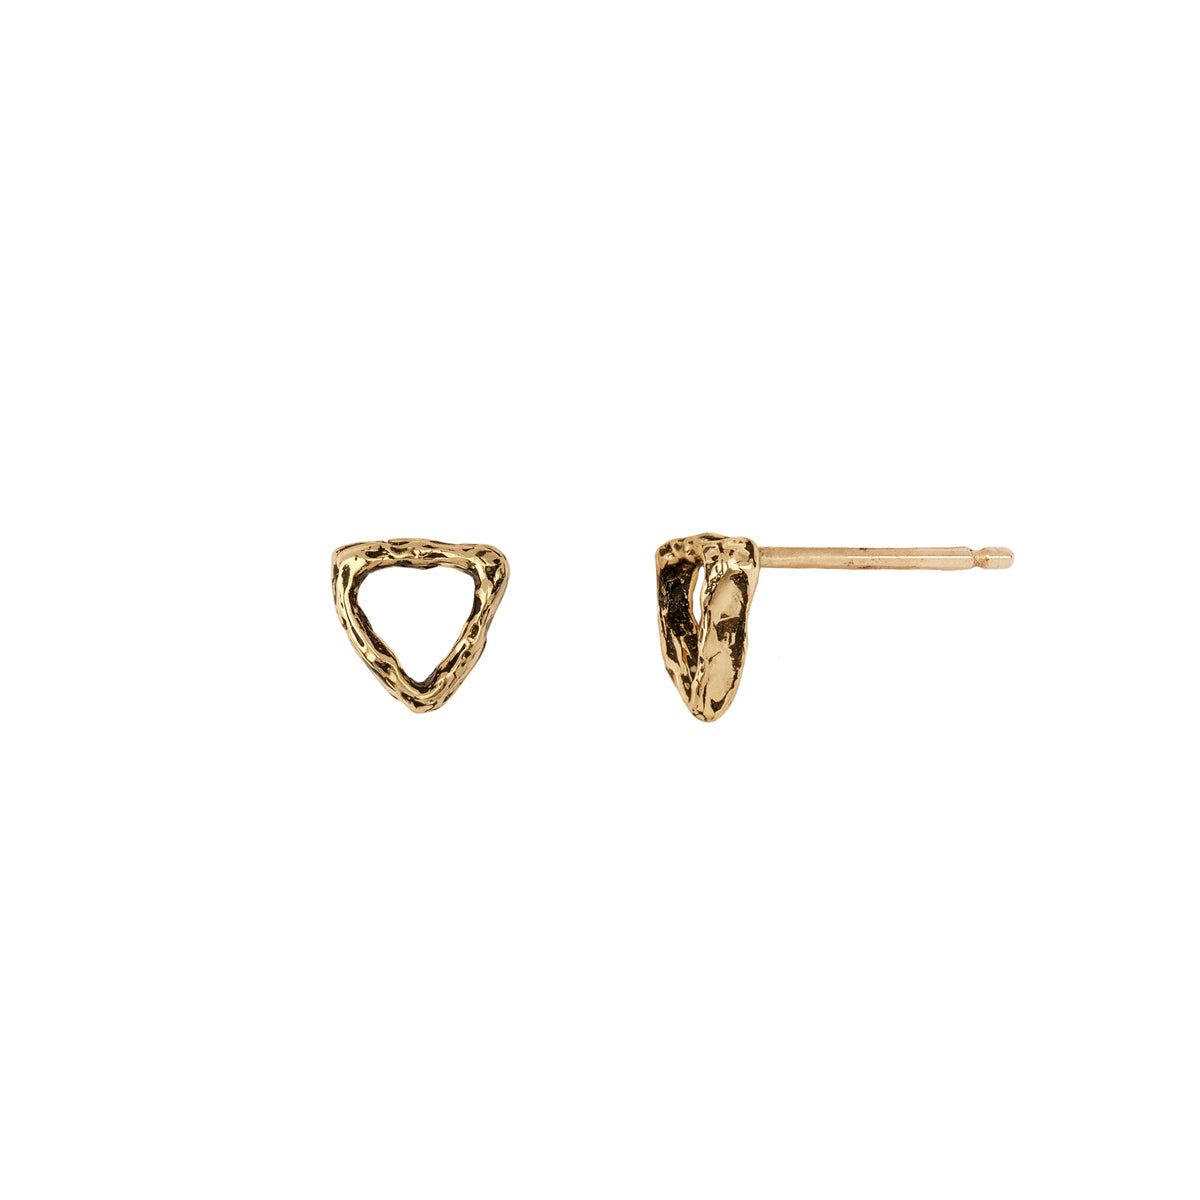 A set of tiny 14k gold stud earrings with an open shield design.